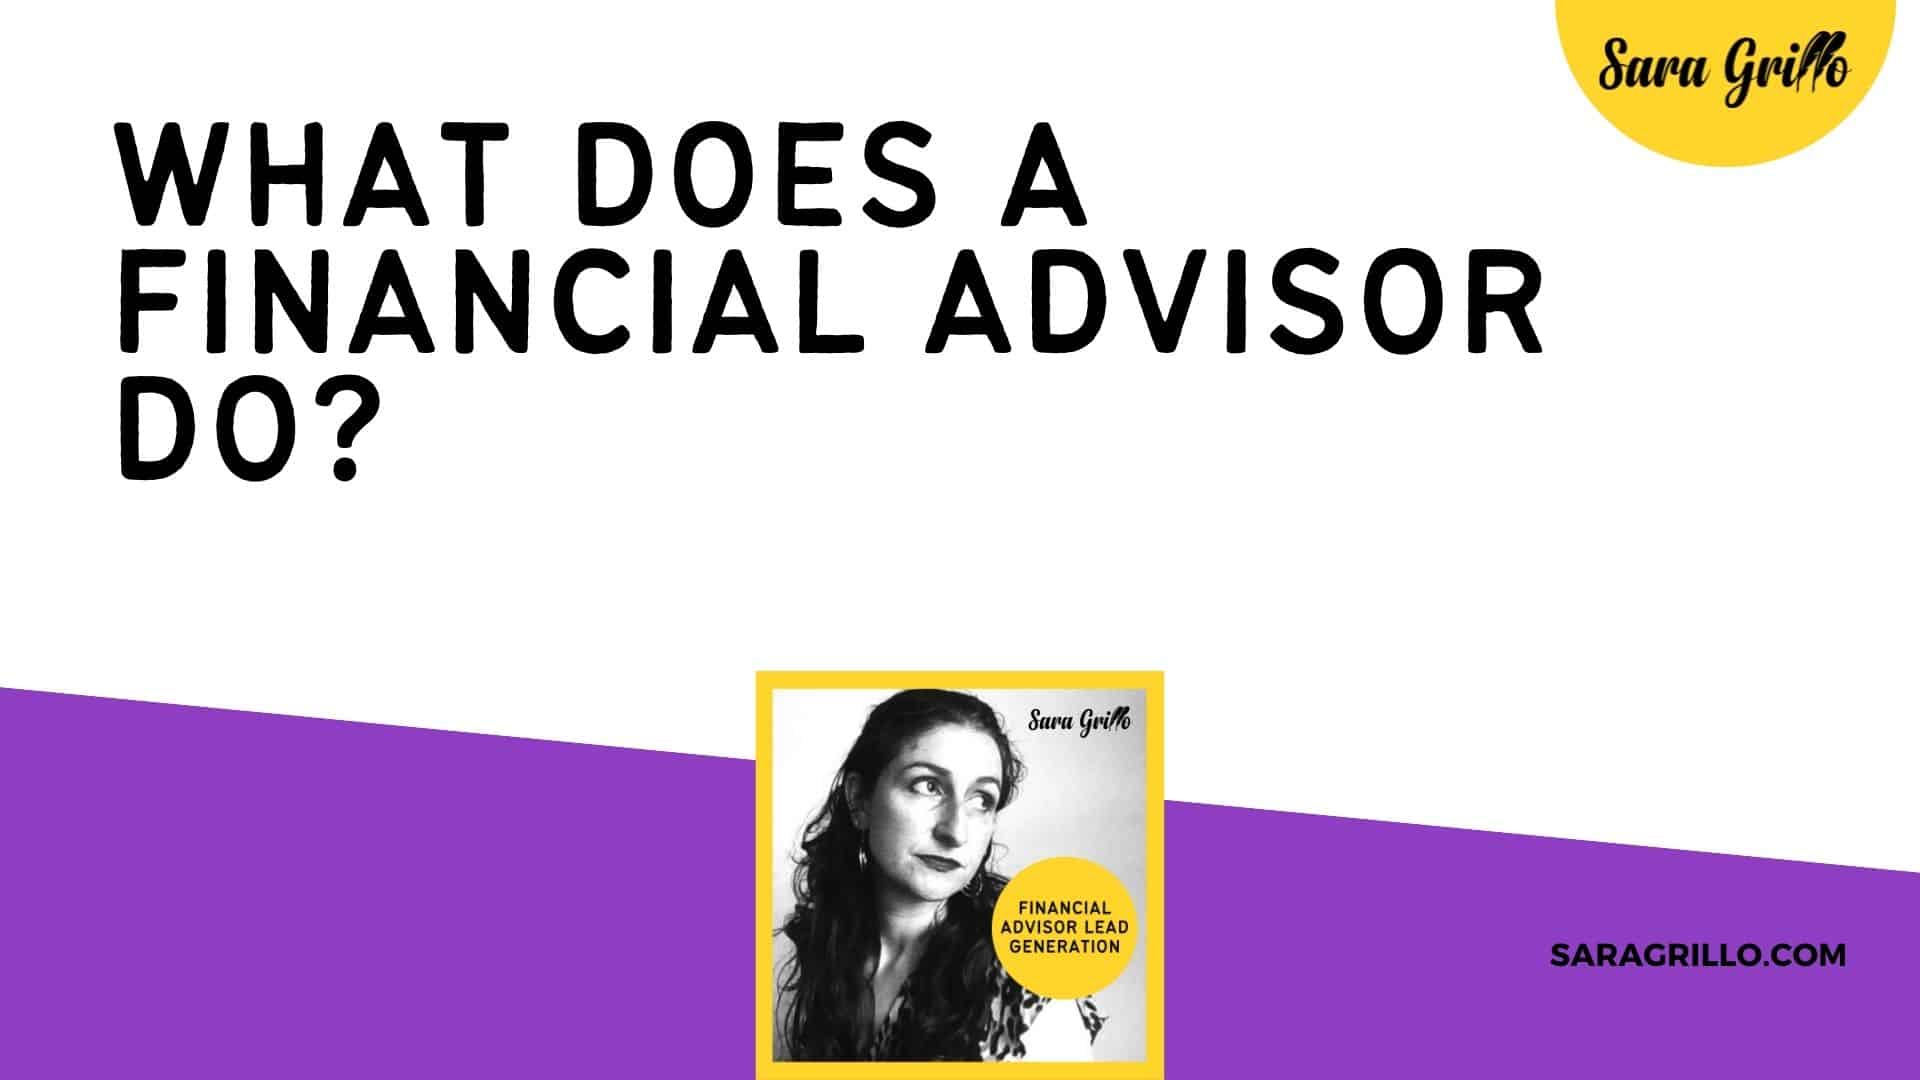 This is a blunt take on the question, what does a financial advisor do?